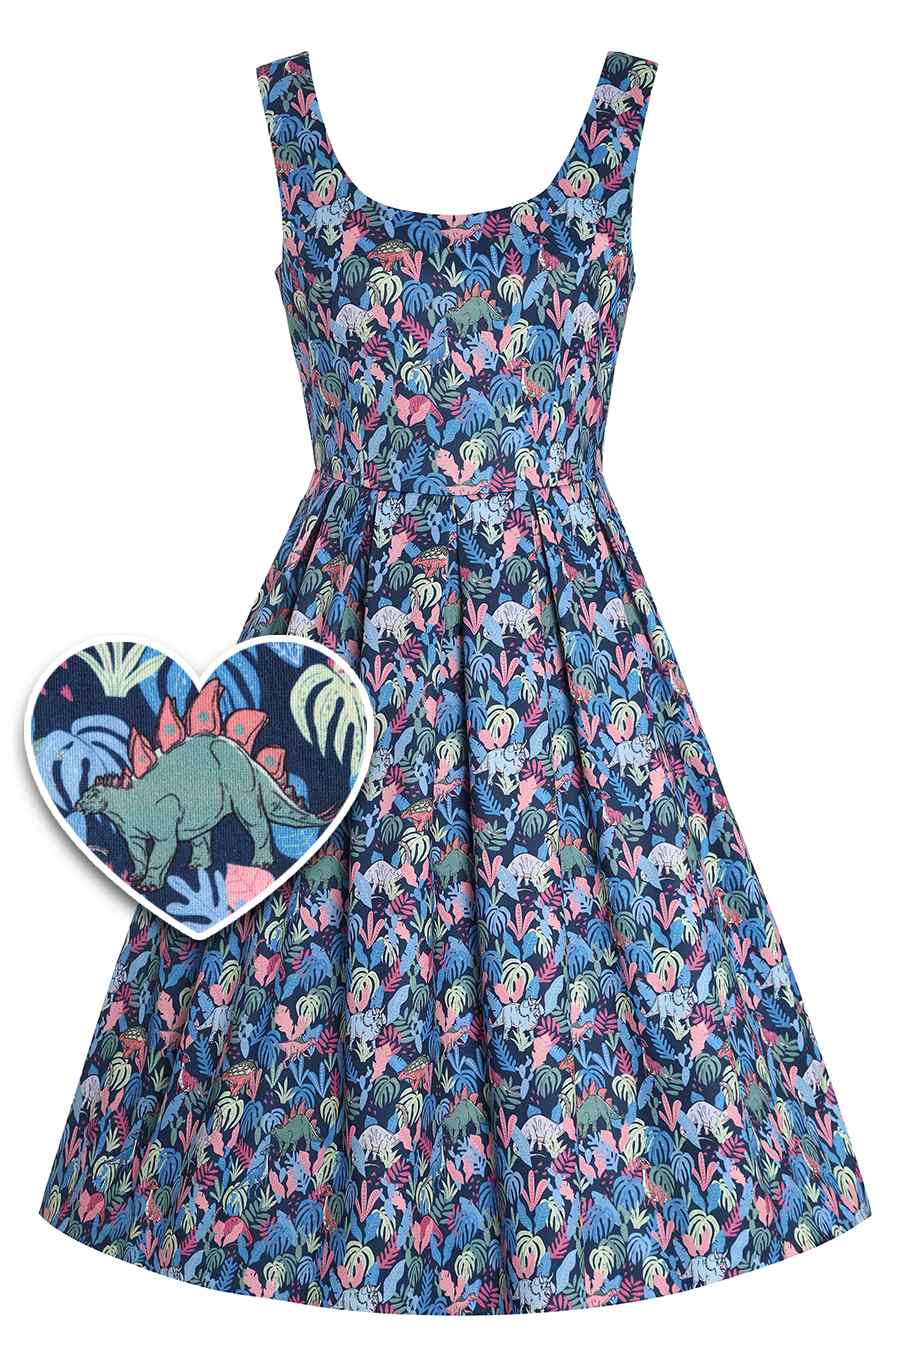 Front View of Multicoloured Dinosaur Flared Dress in Navy Blue